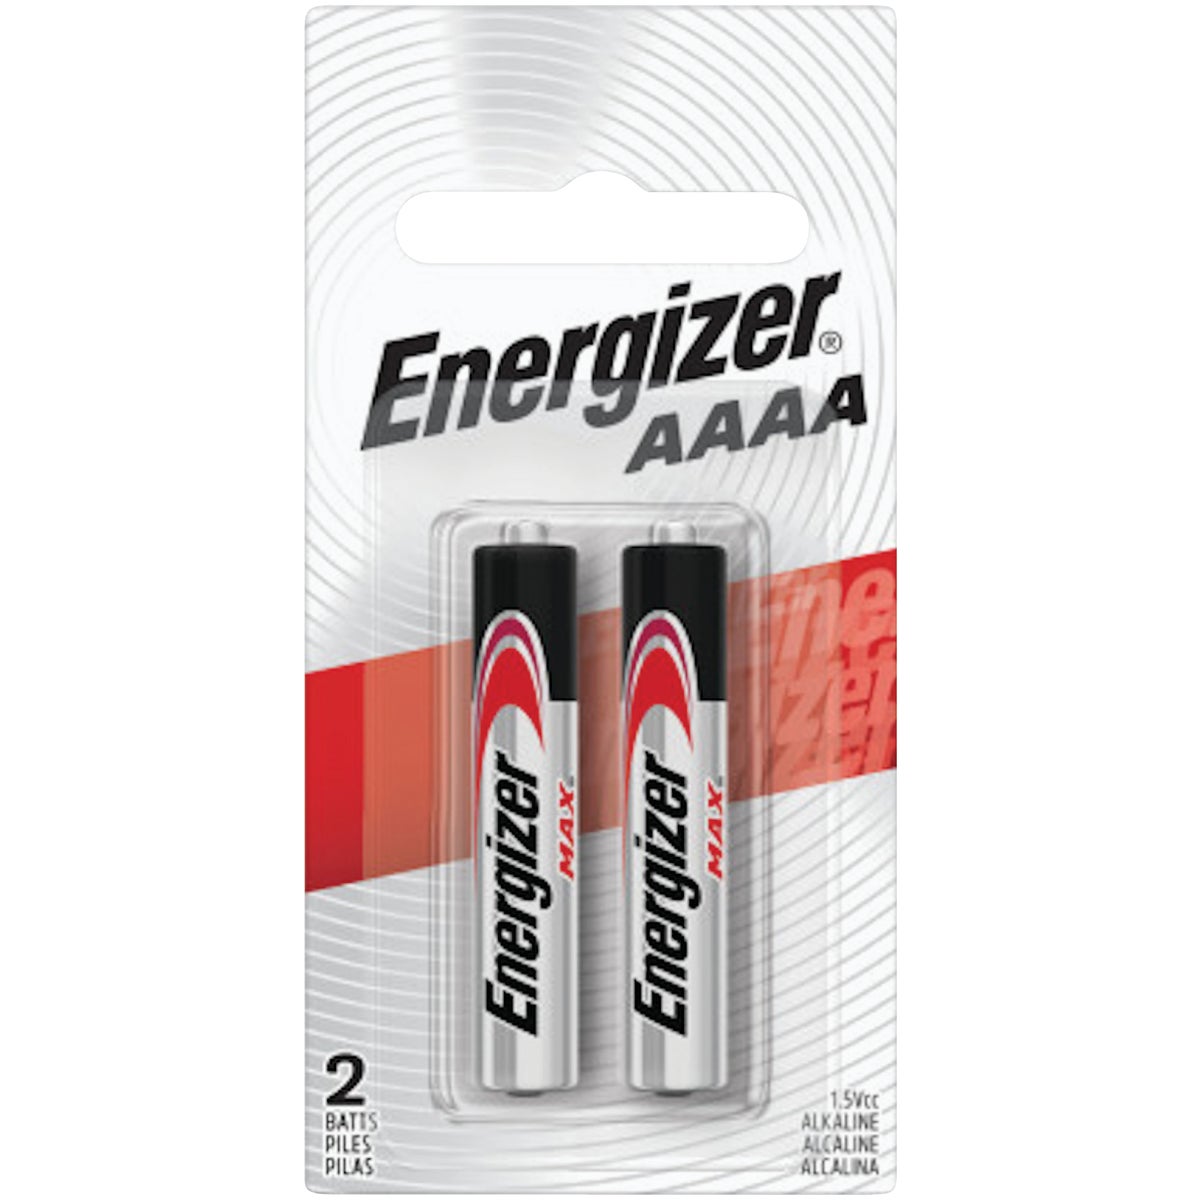 Item 807958, AAAA batteries provide dependable power to your important electronics.